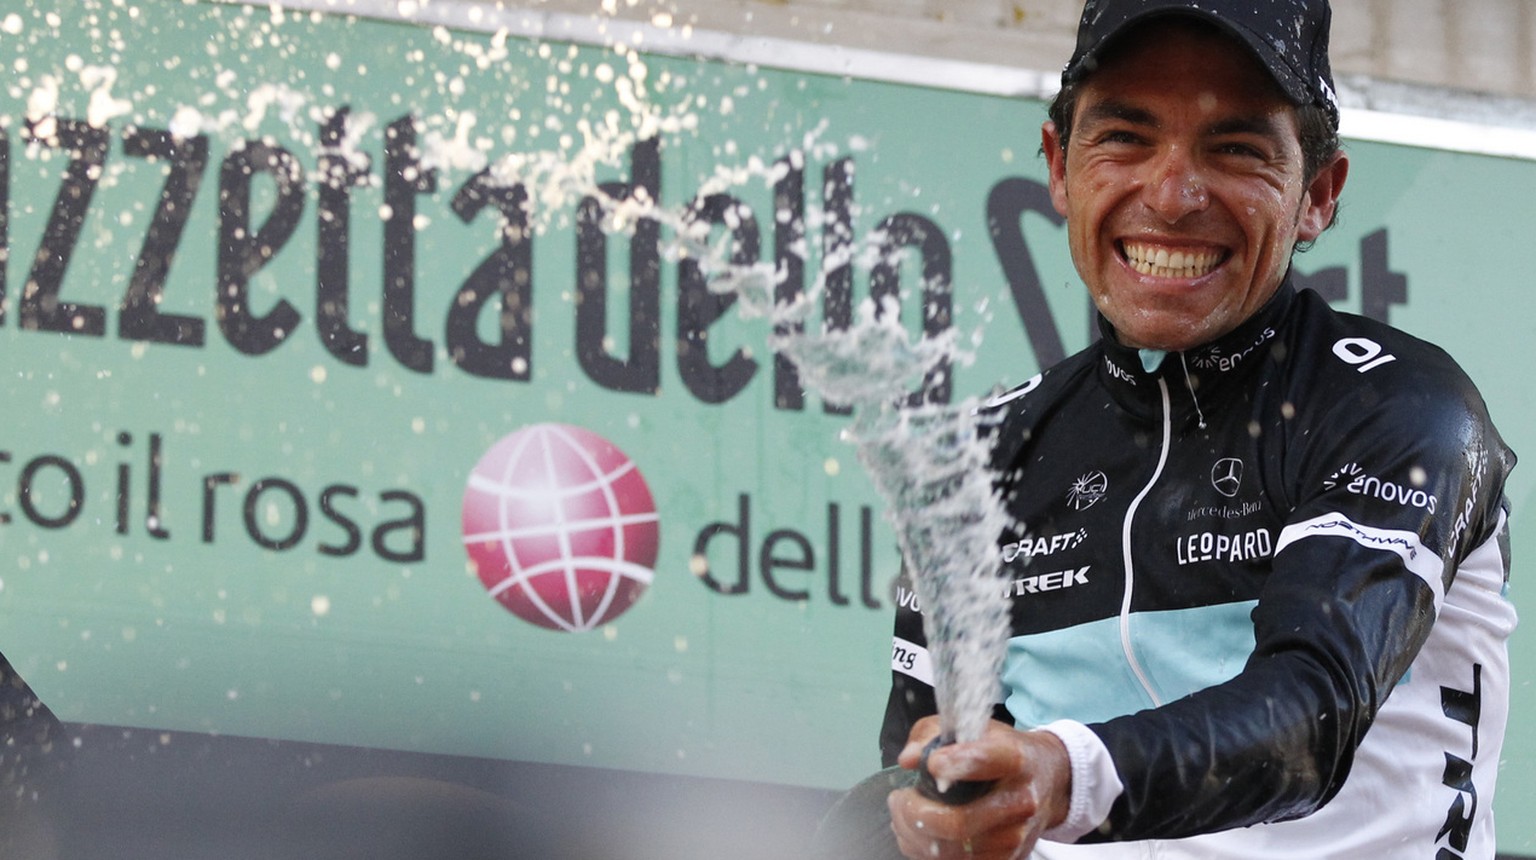 Oliver Zaugg of Switzerland sprays sparkling wine as he celebrates on the podium after winning the Tour of Lombardy cycling race in in Lecco, Italy, Saturday, Oct.15, 2011. Zaugg of Switzerland claime ...